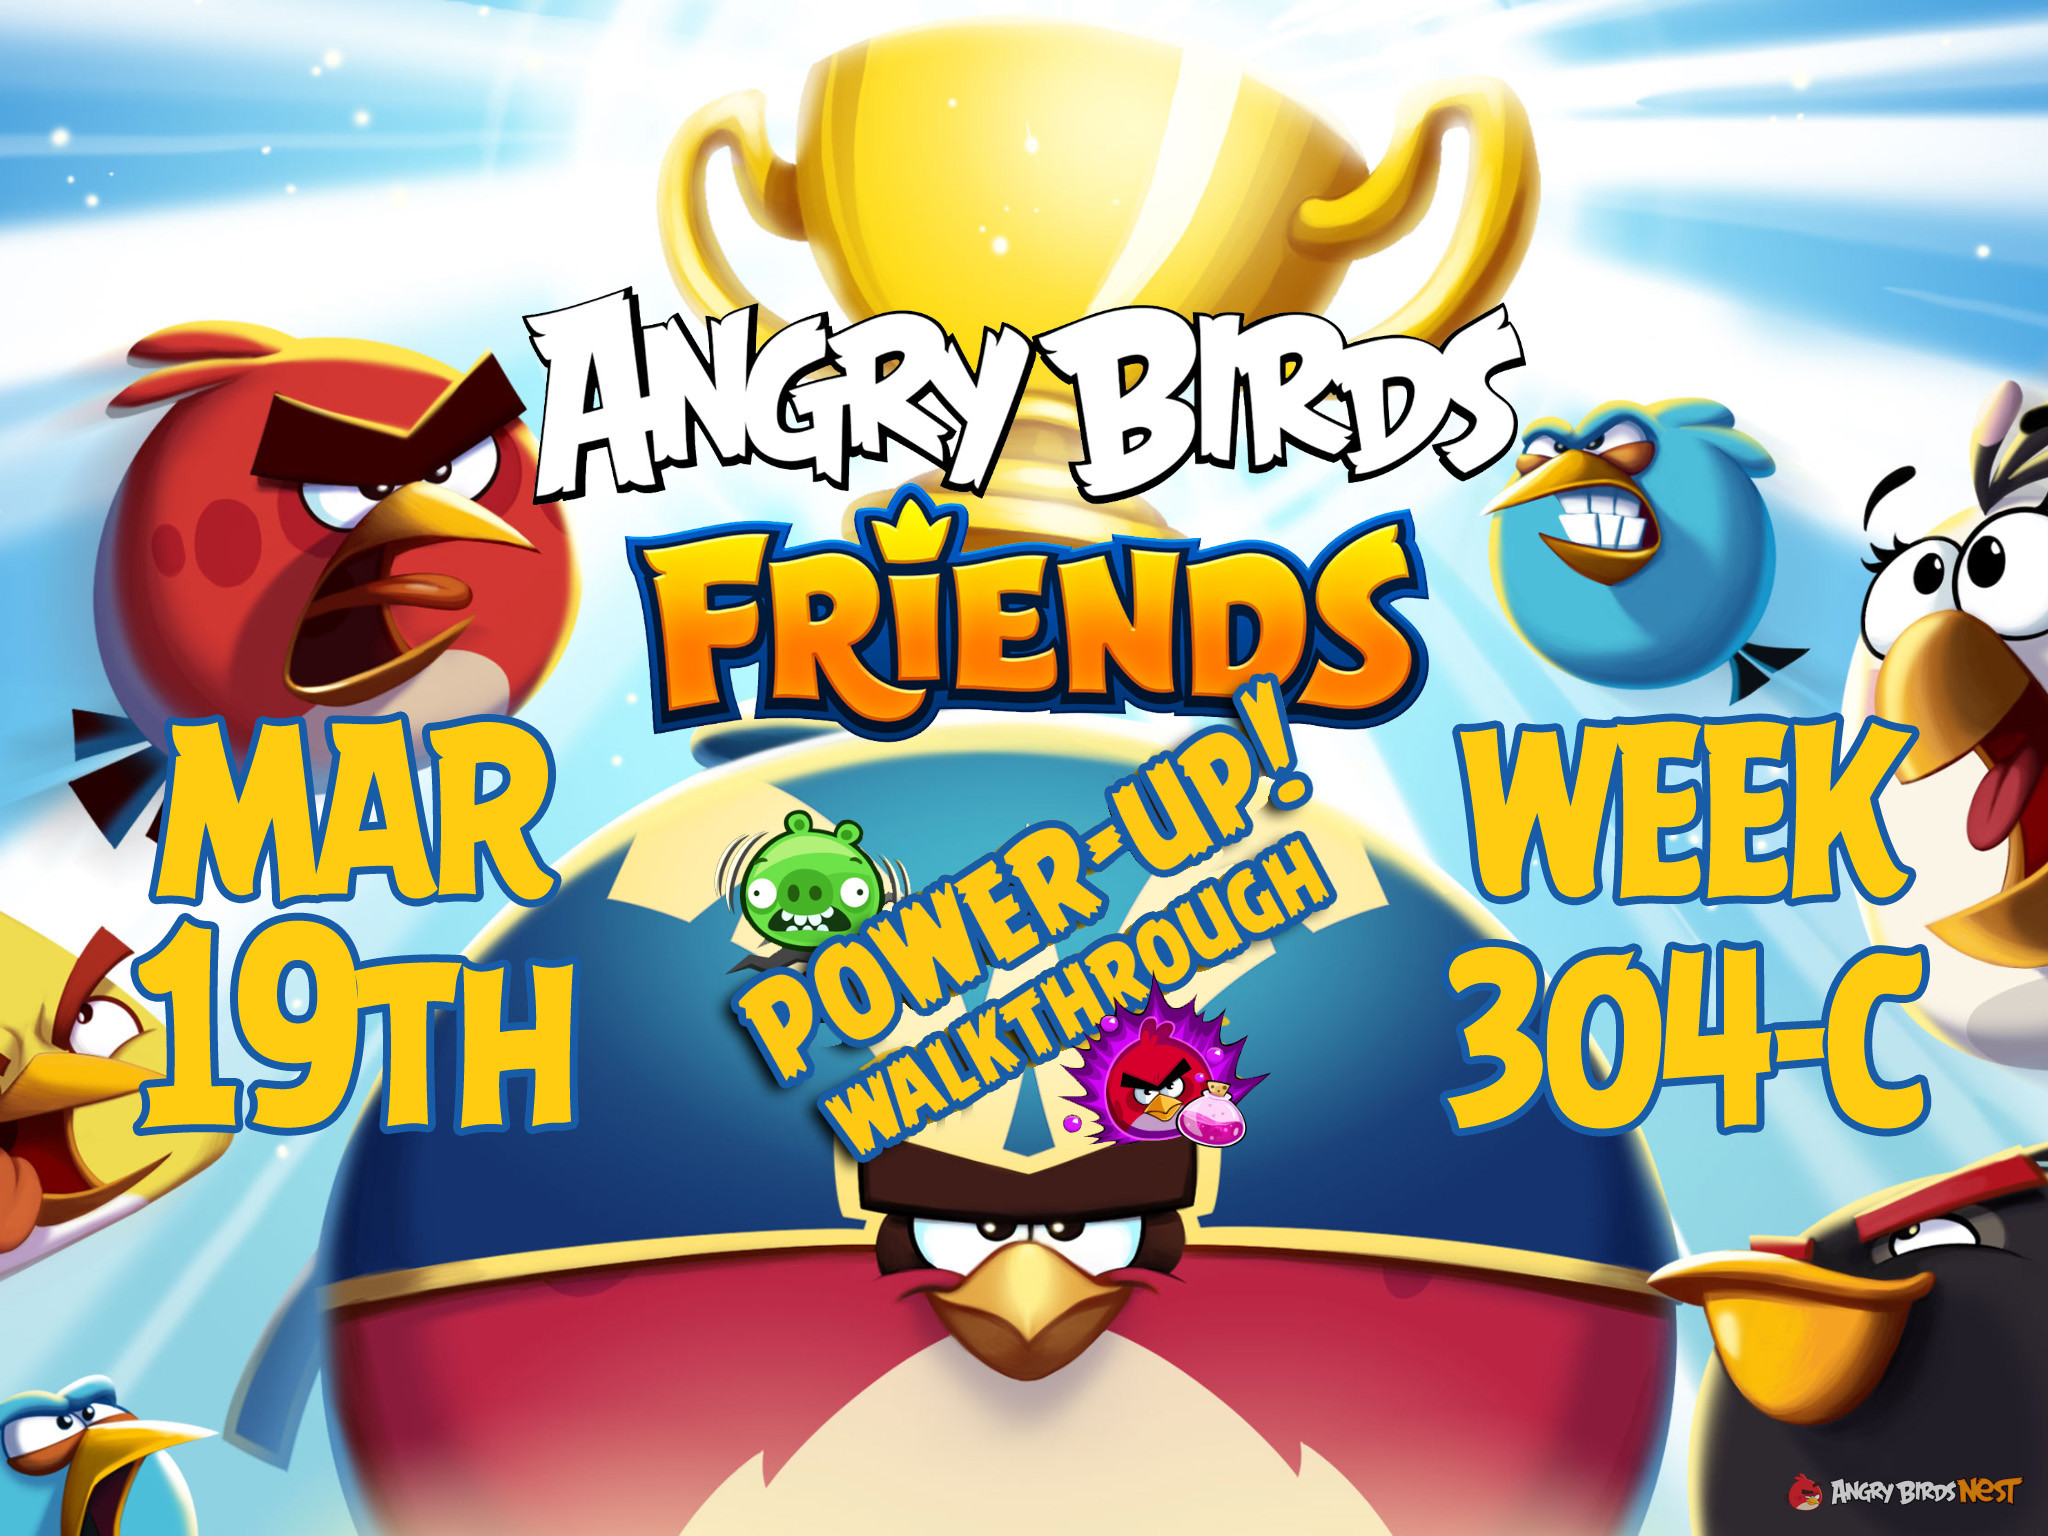 Angry Birds Friends Tournament Week 304-C Feature Image PU